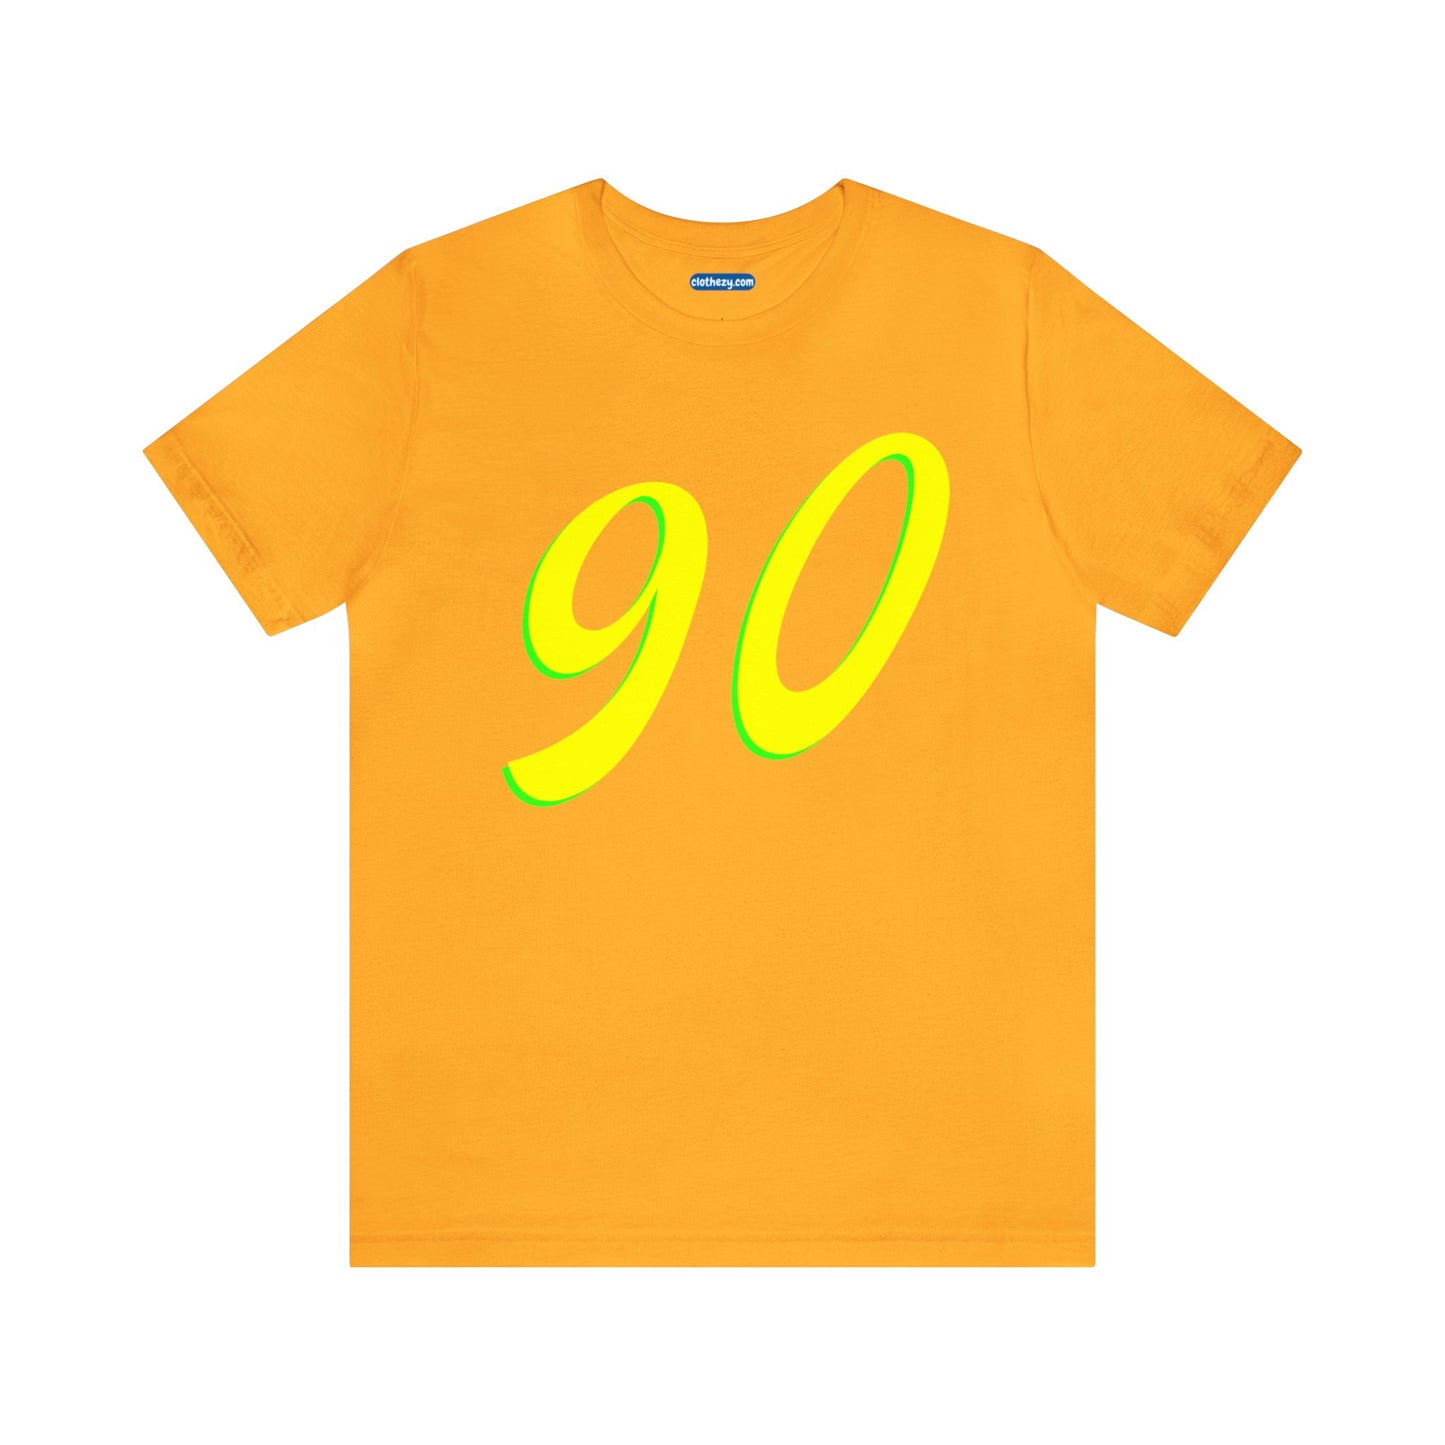 Number 90 Design - Soft Cotton Tee for birthdays and celebrations, Gift for friends and family, Multiple Options by clothezy.com in Green Heather Size Small - Buy Now